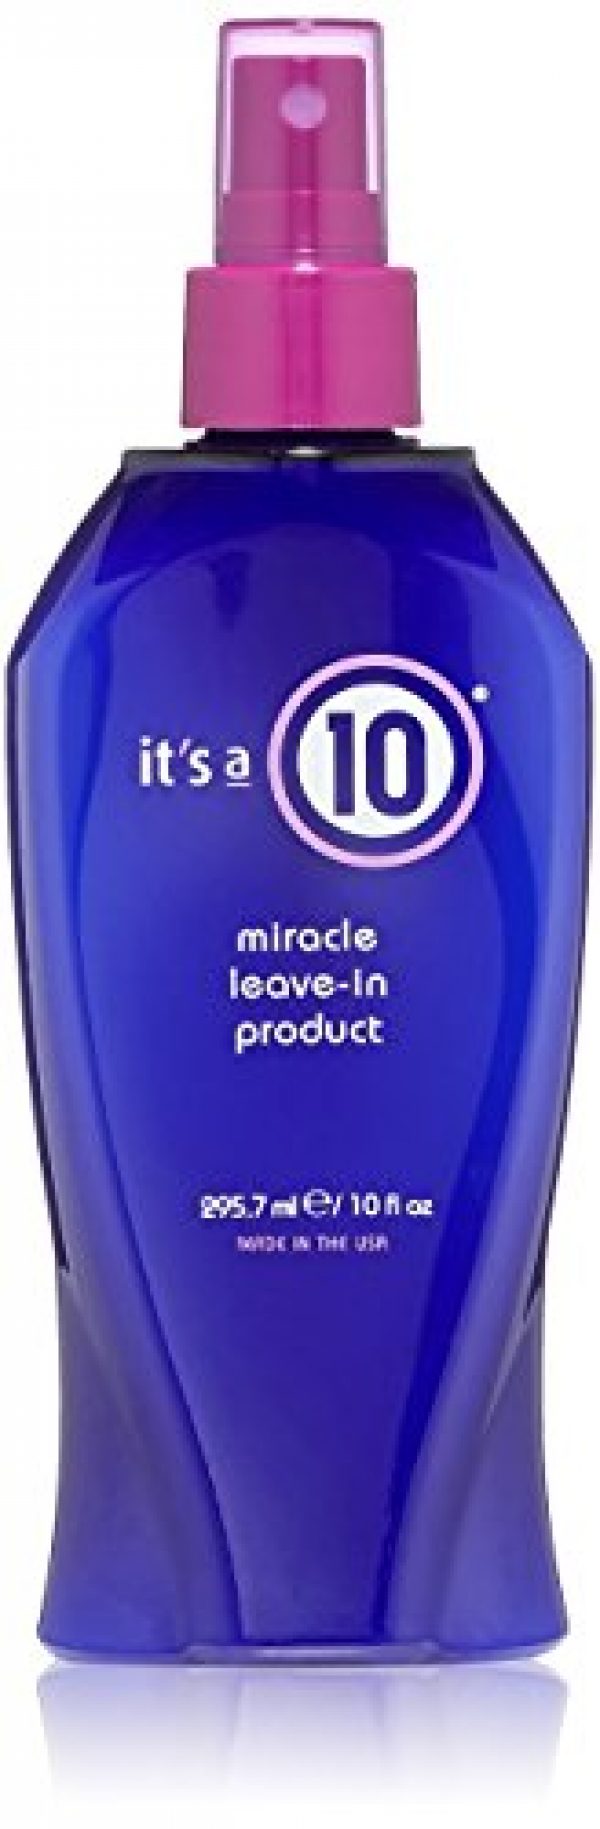 It's A 10 Haircare Miracle Leave-In Conditioner Spray - 10 oz. - 1ct 5